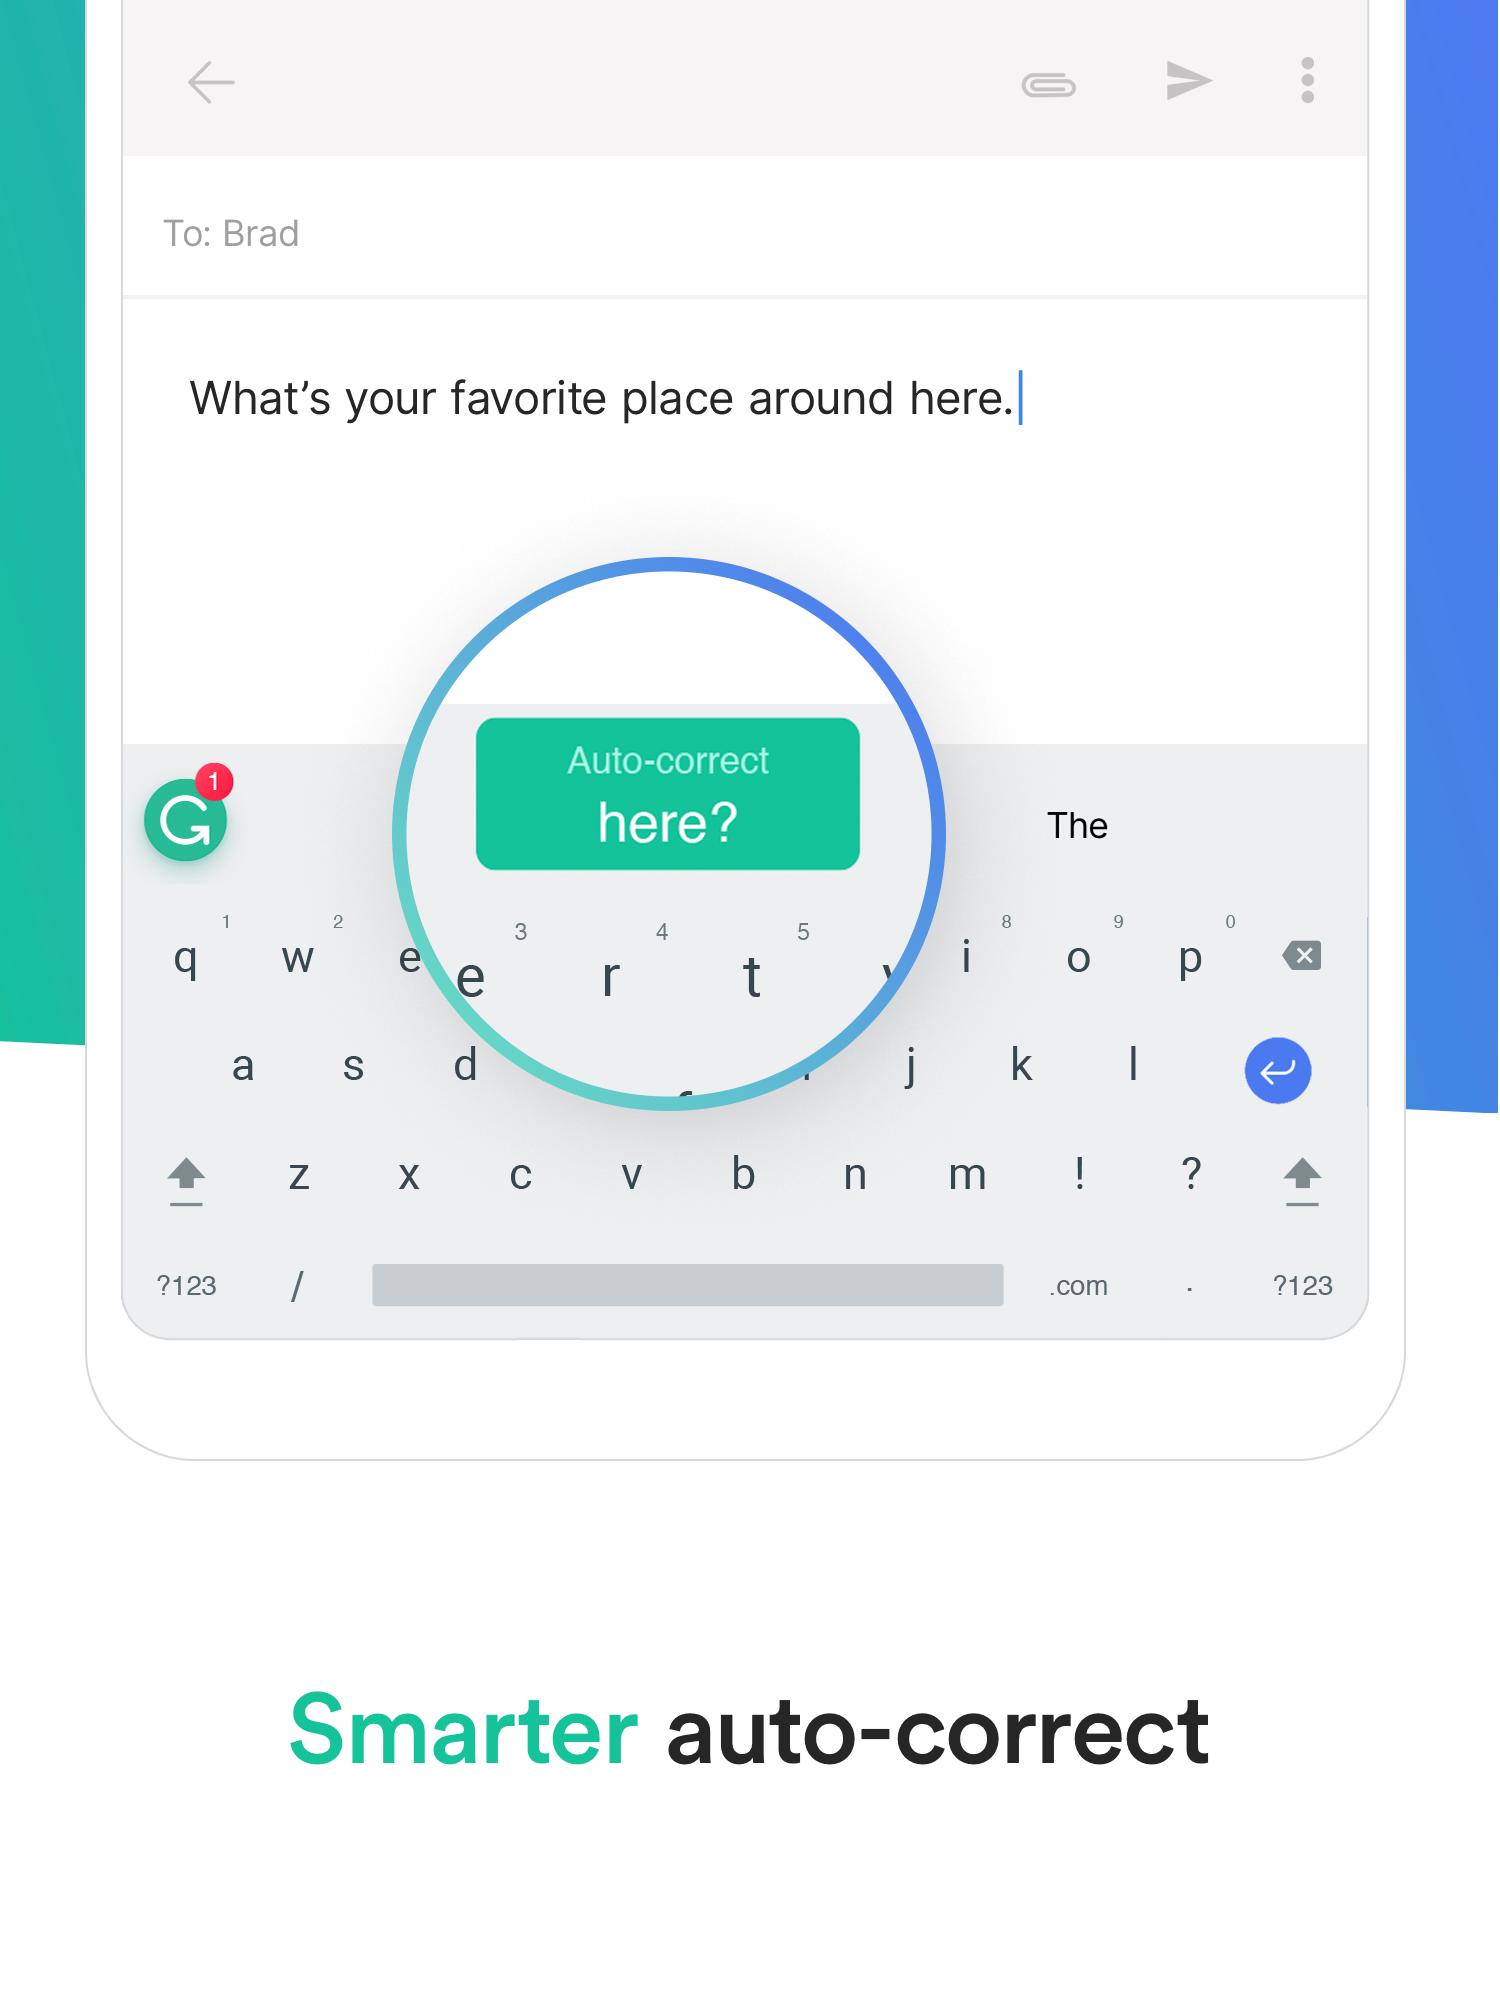 Grammarly Keyboard — Type with confidence 1.4.0.7 Screenshot 15